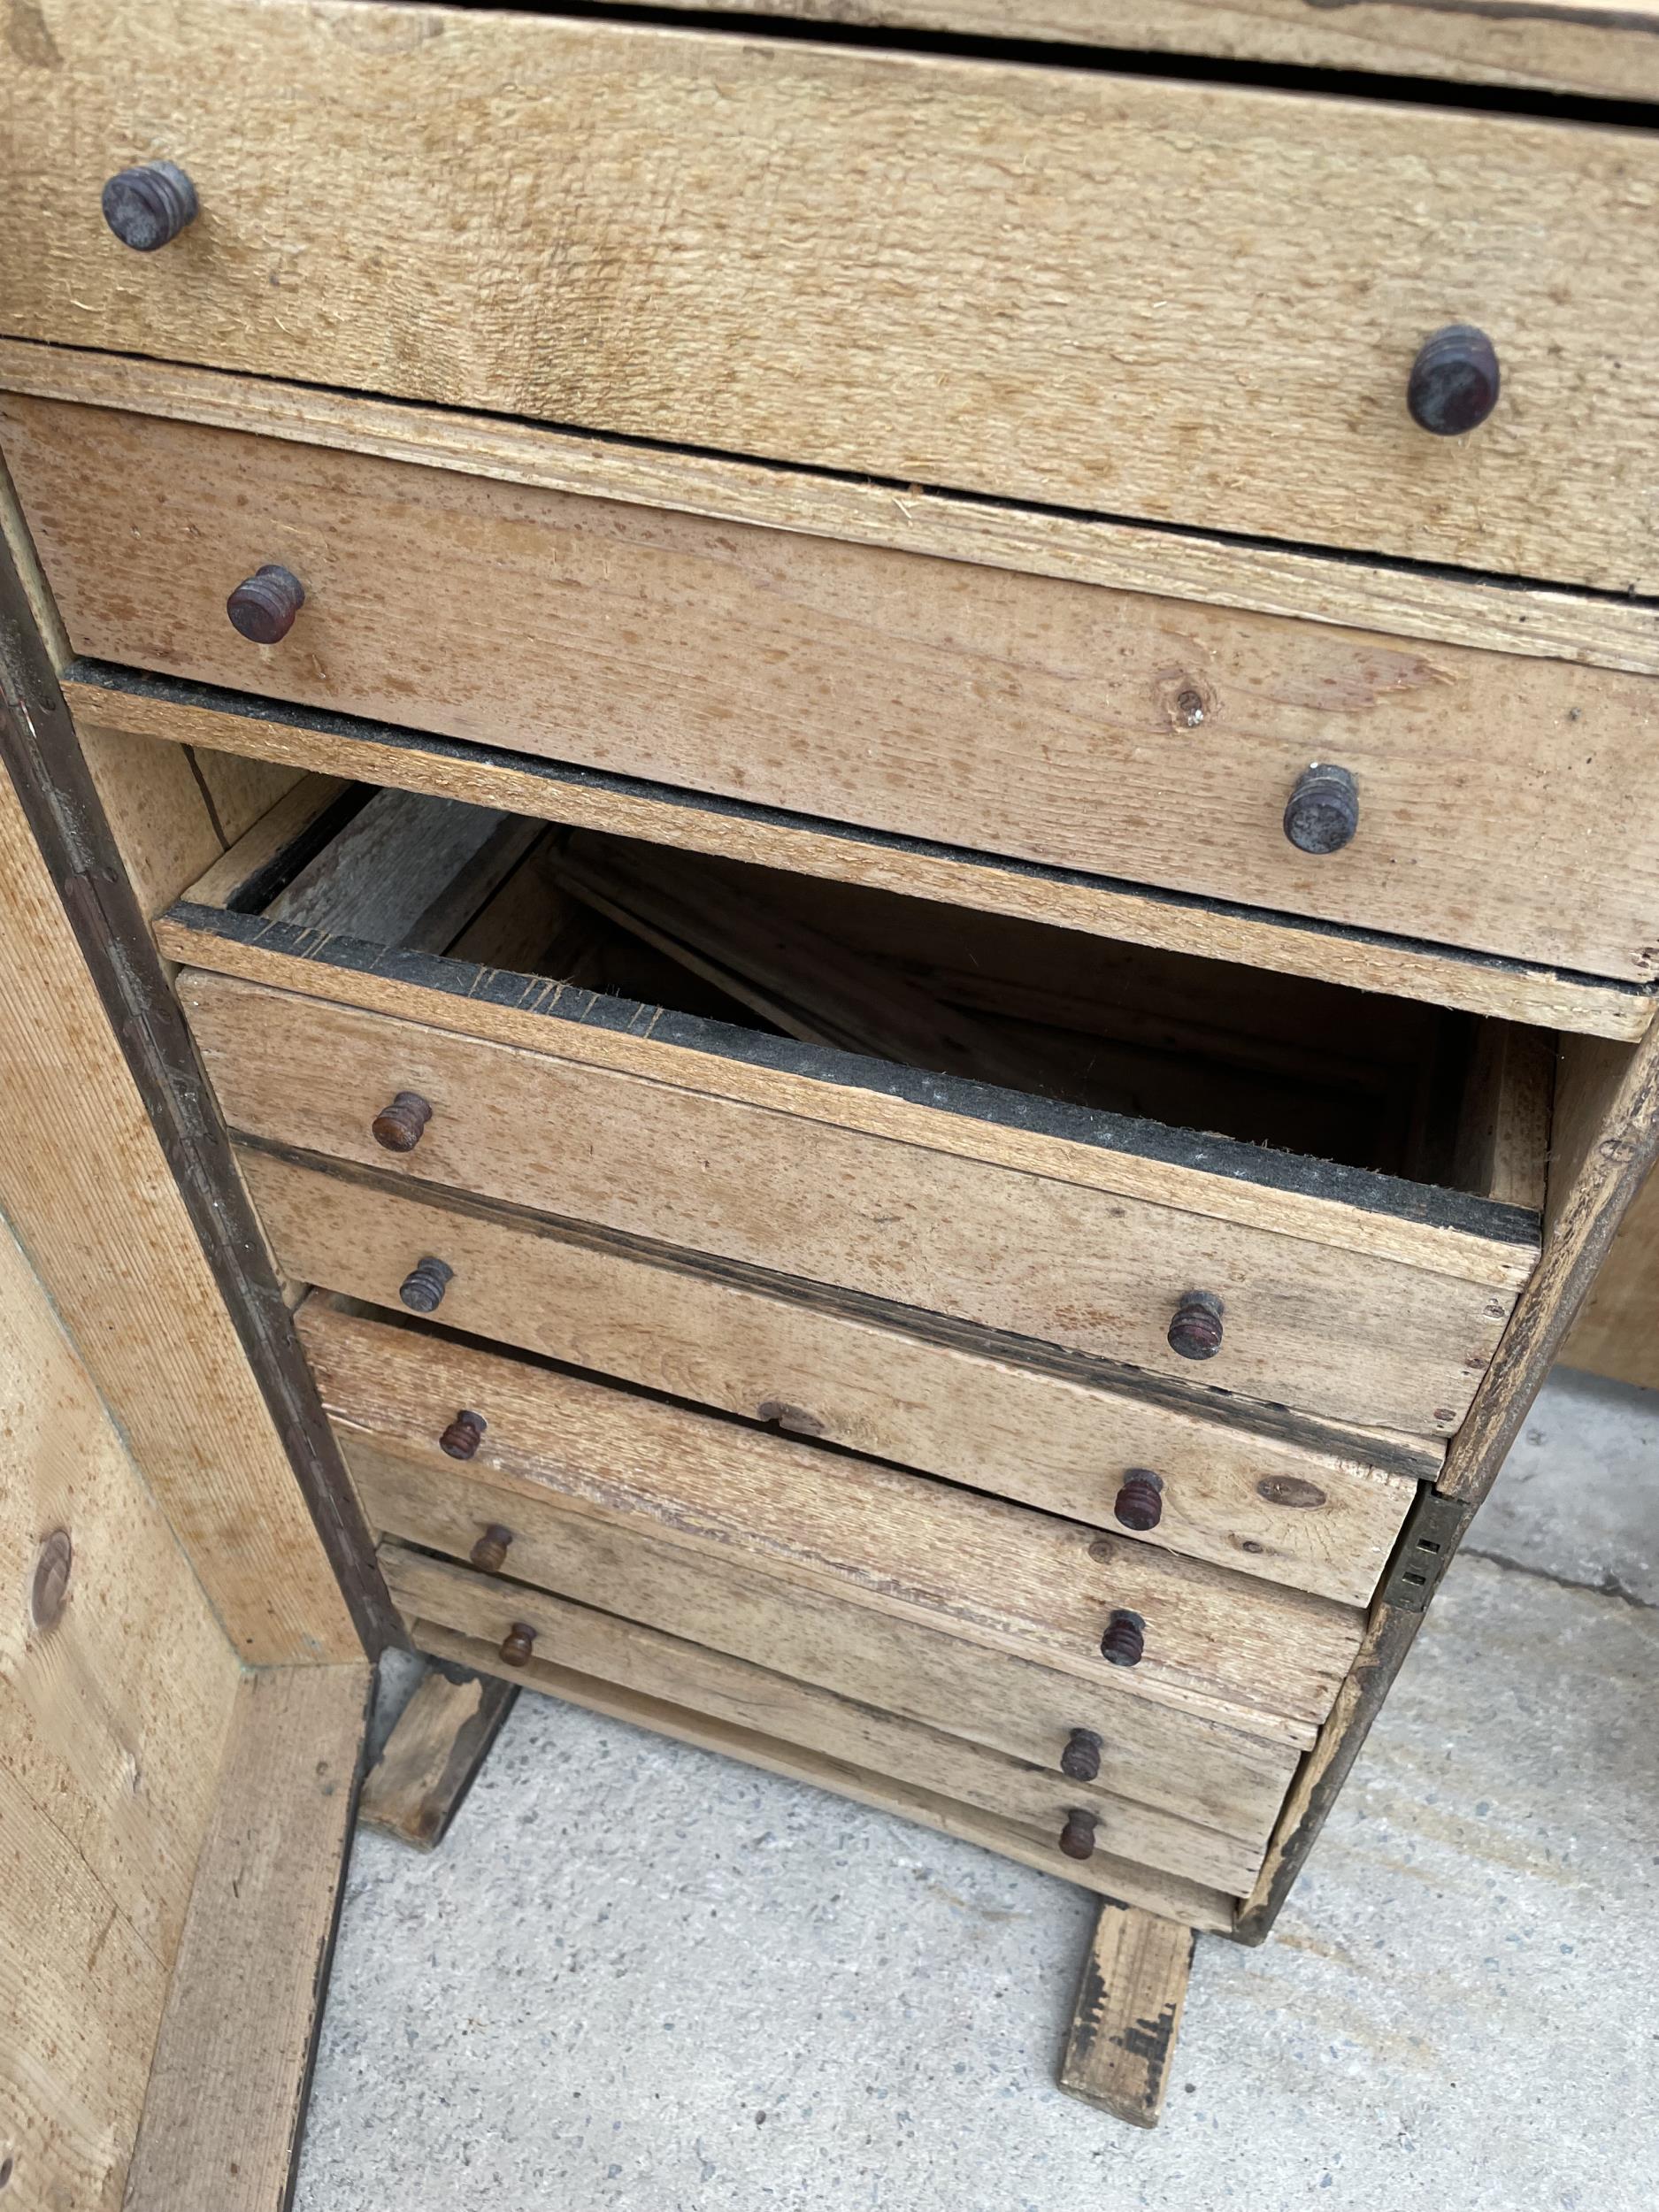 A VICTORIAN PINE LARGE VINTAGE JOINER'S CHEST WITH VARIOUS TOOLS SUCH AS G-CLAMP , VINTAGE SPIRIT - Image 3 of 6